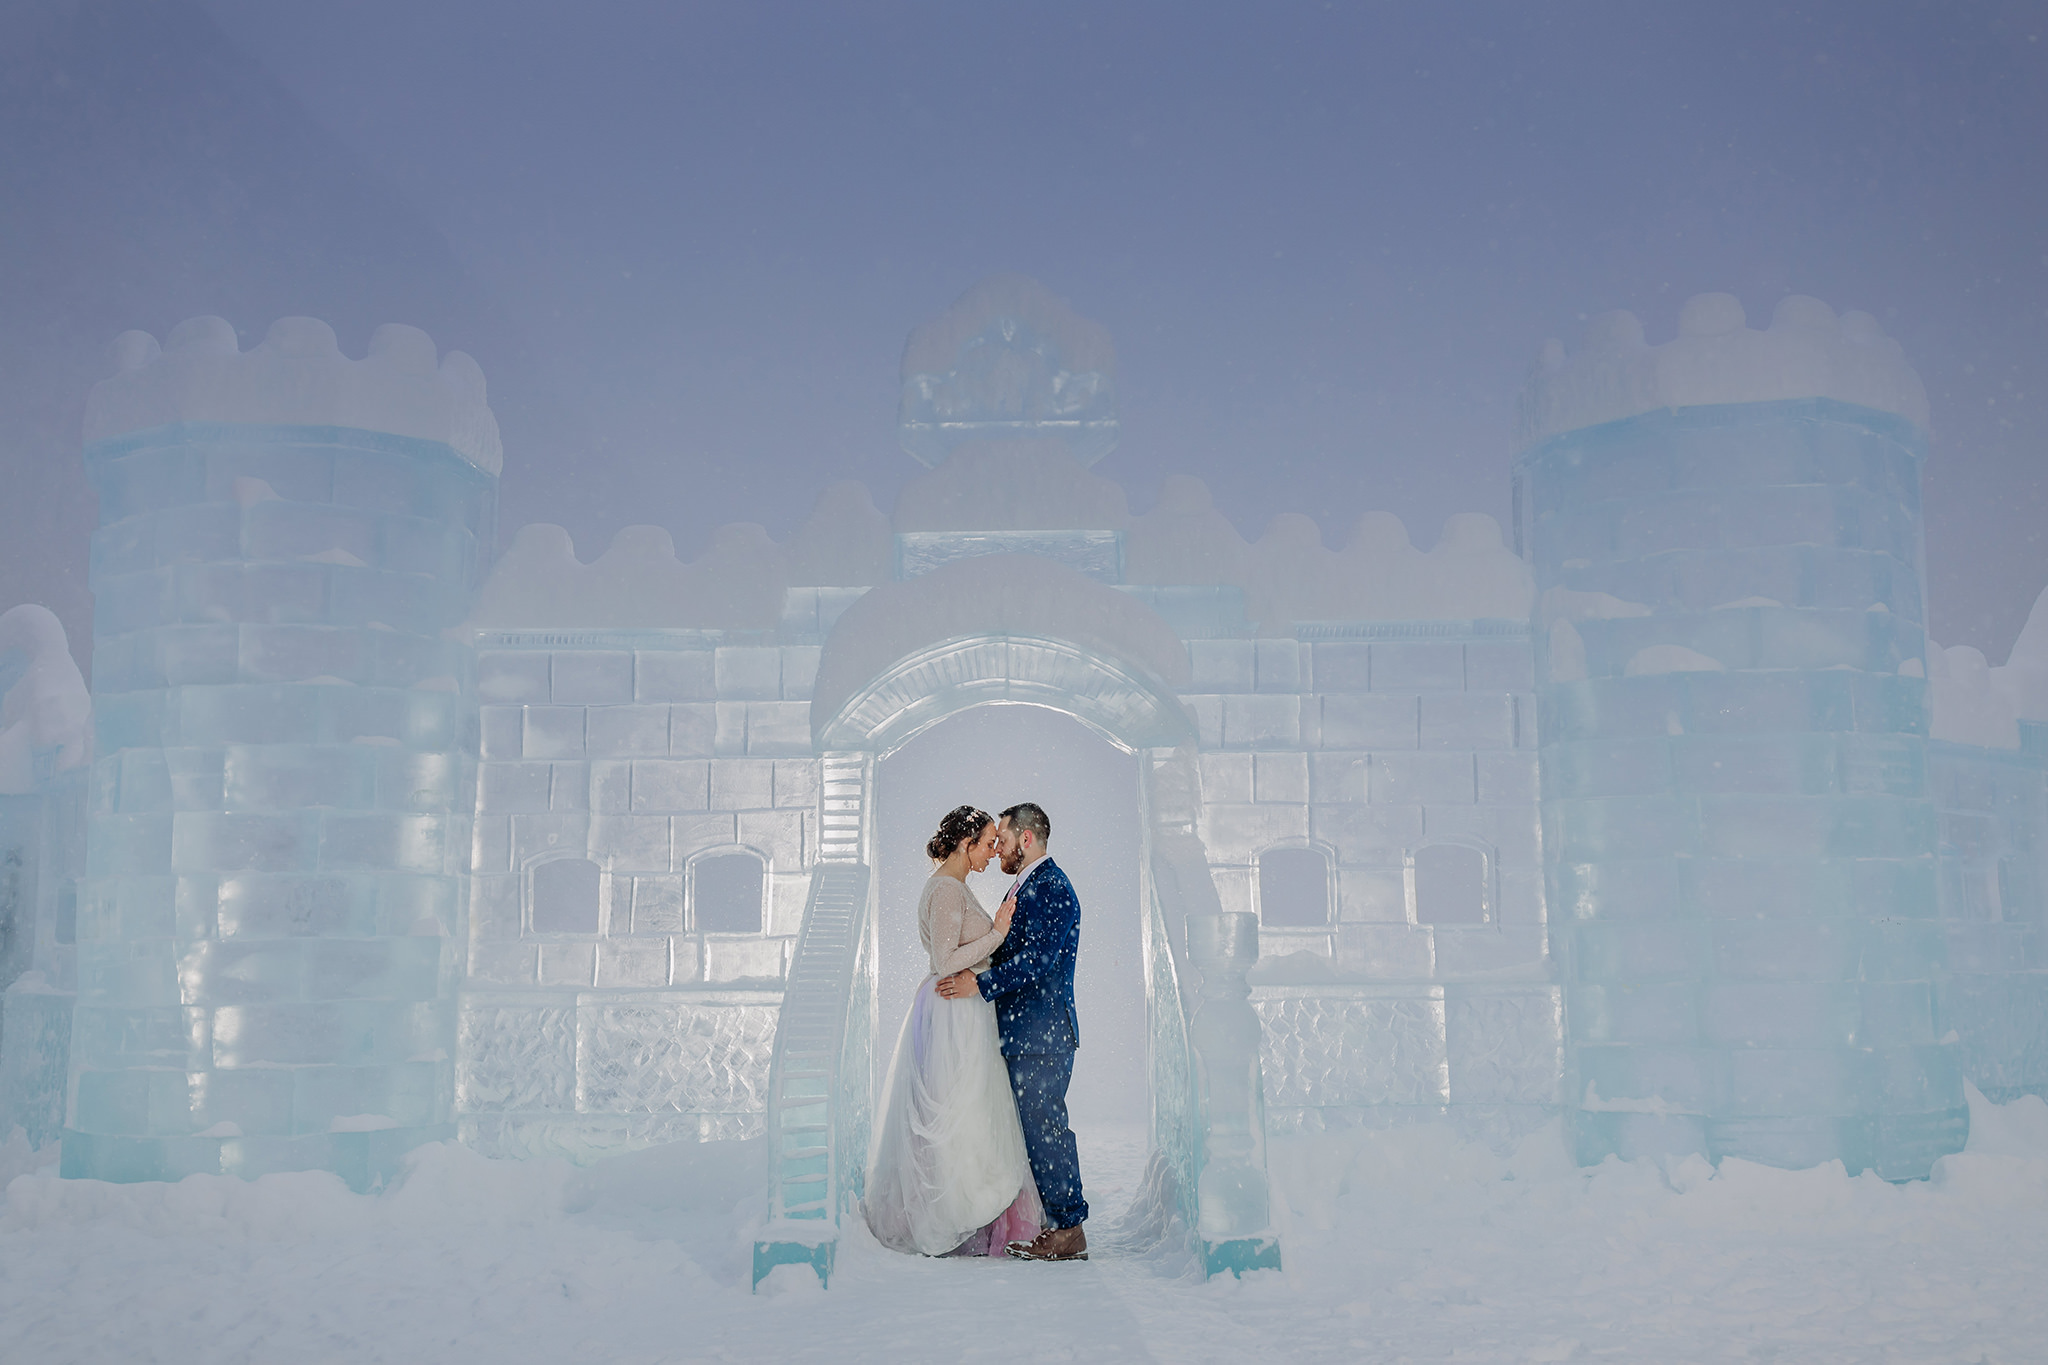 Elope in Lake Louise with a magical snowy outdoor winter wonderland